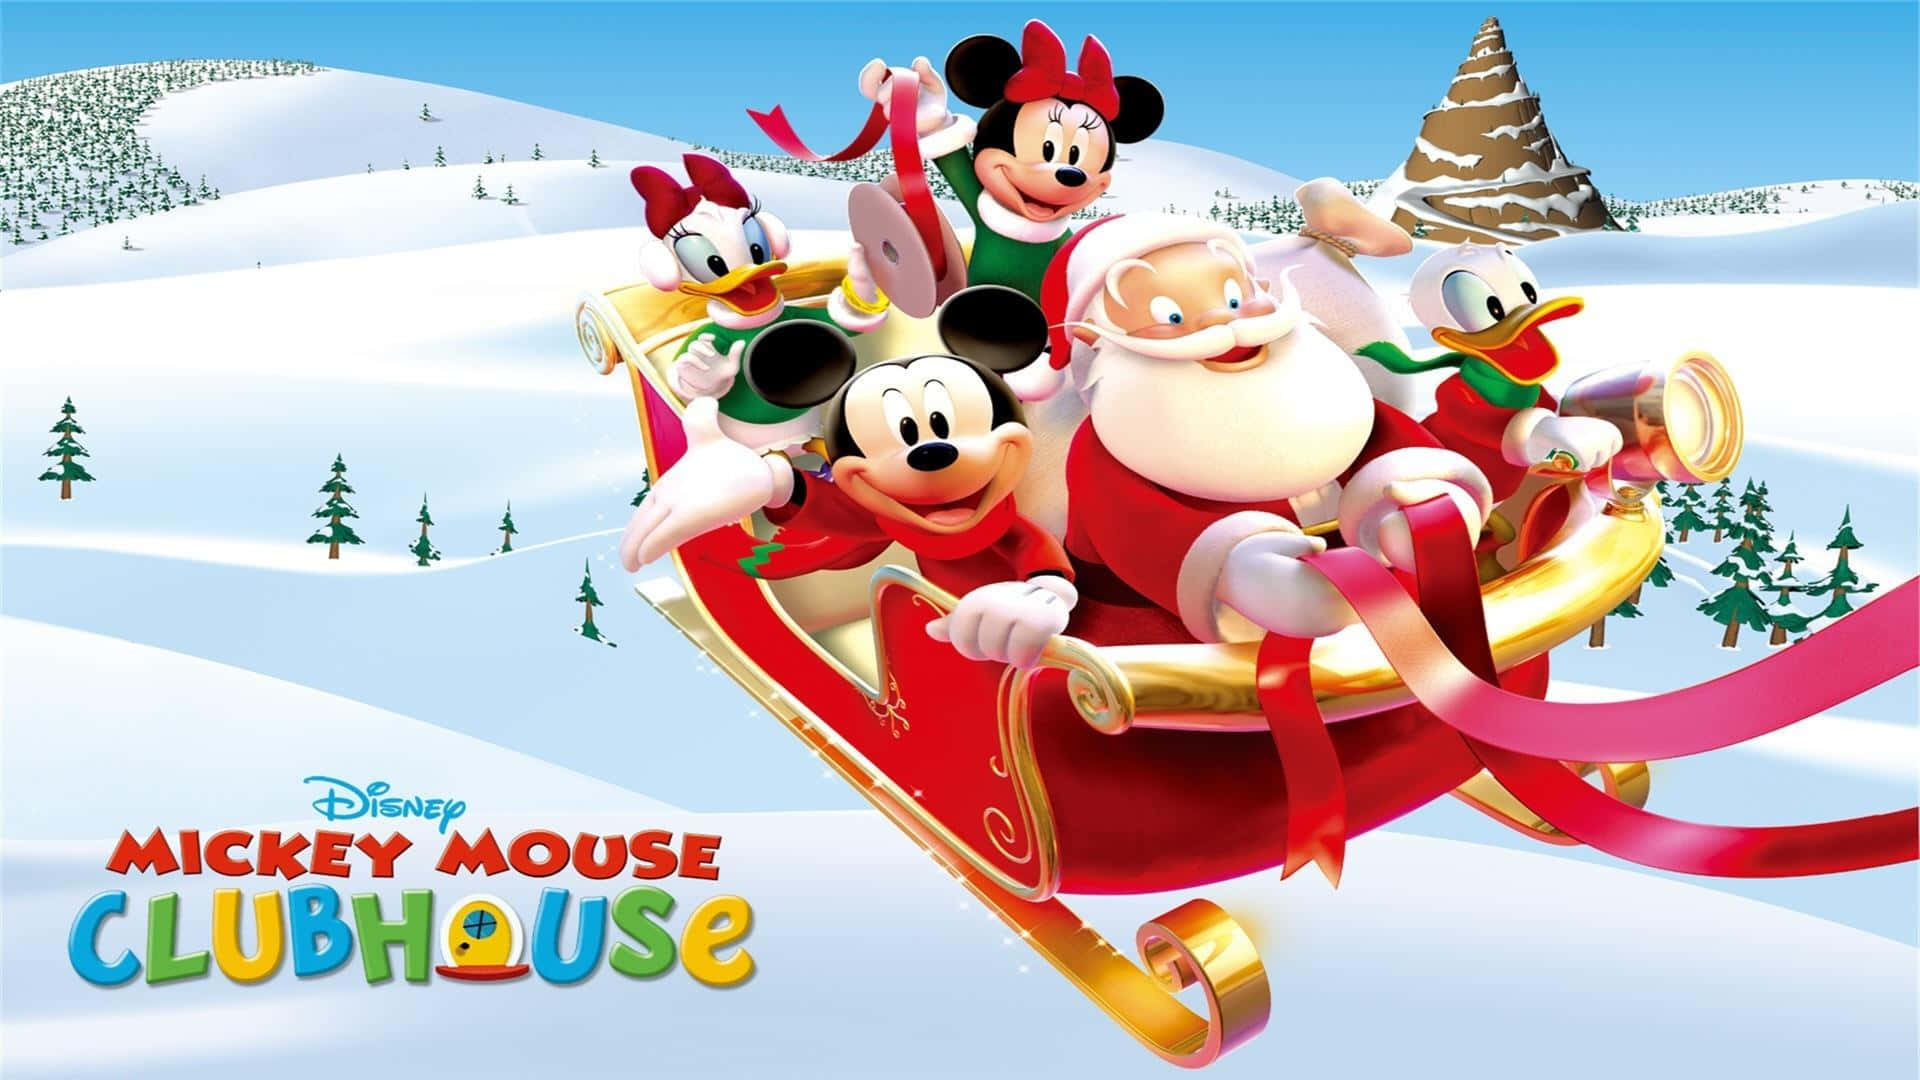 Mickeymouse Clubhouse 2 - Papai Noel